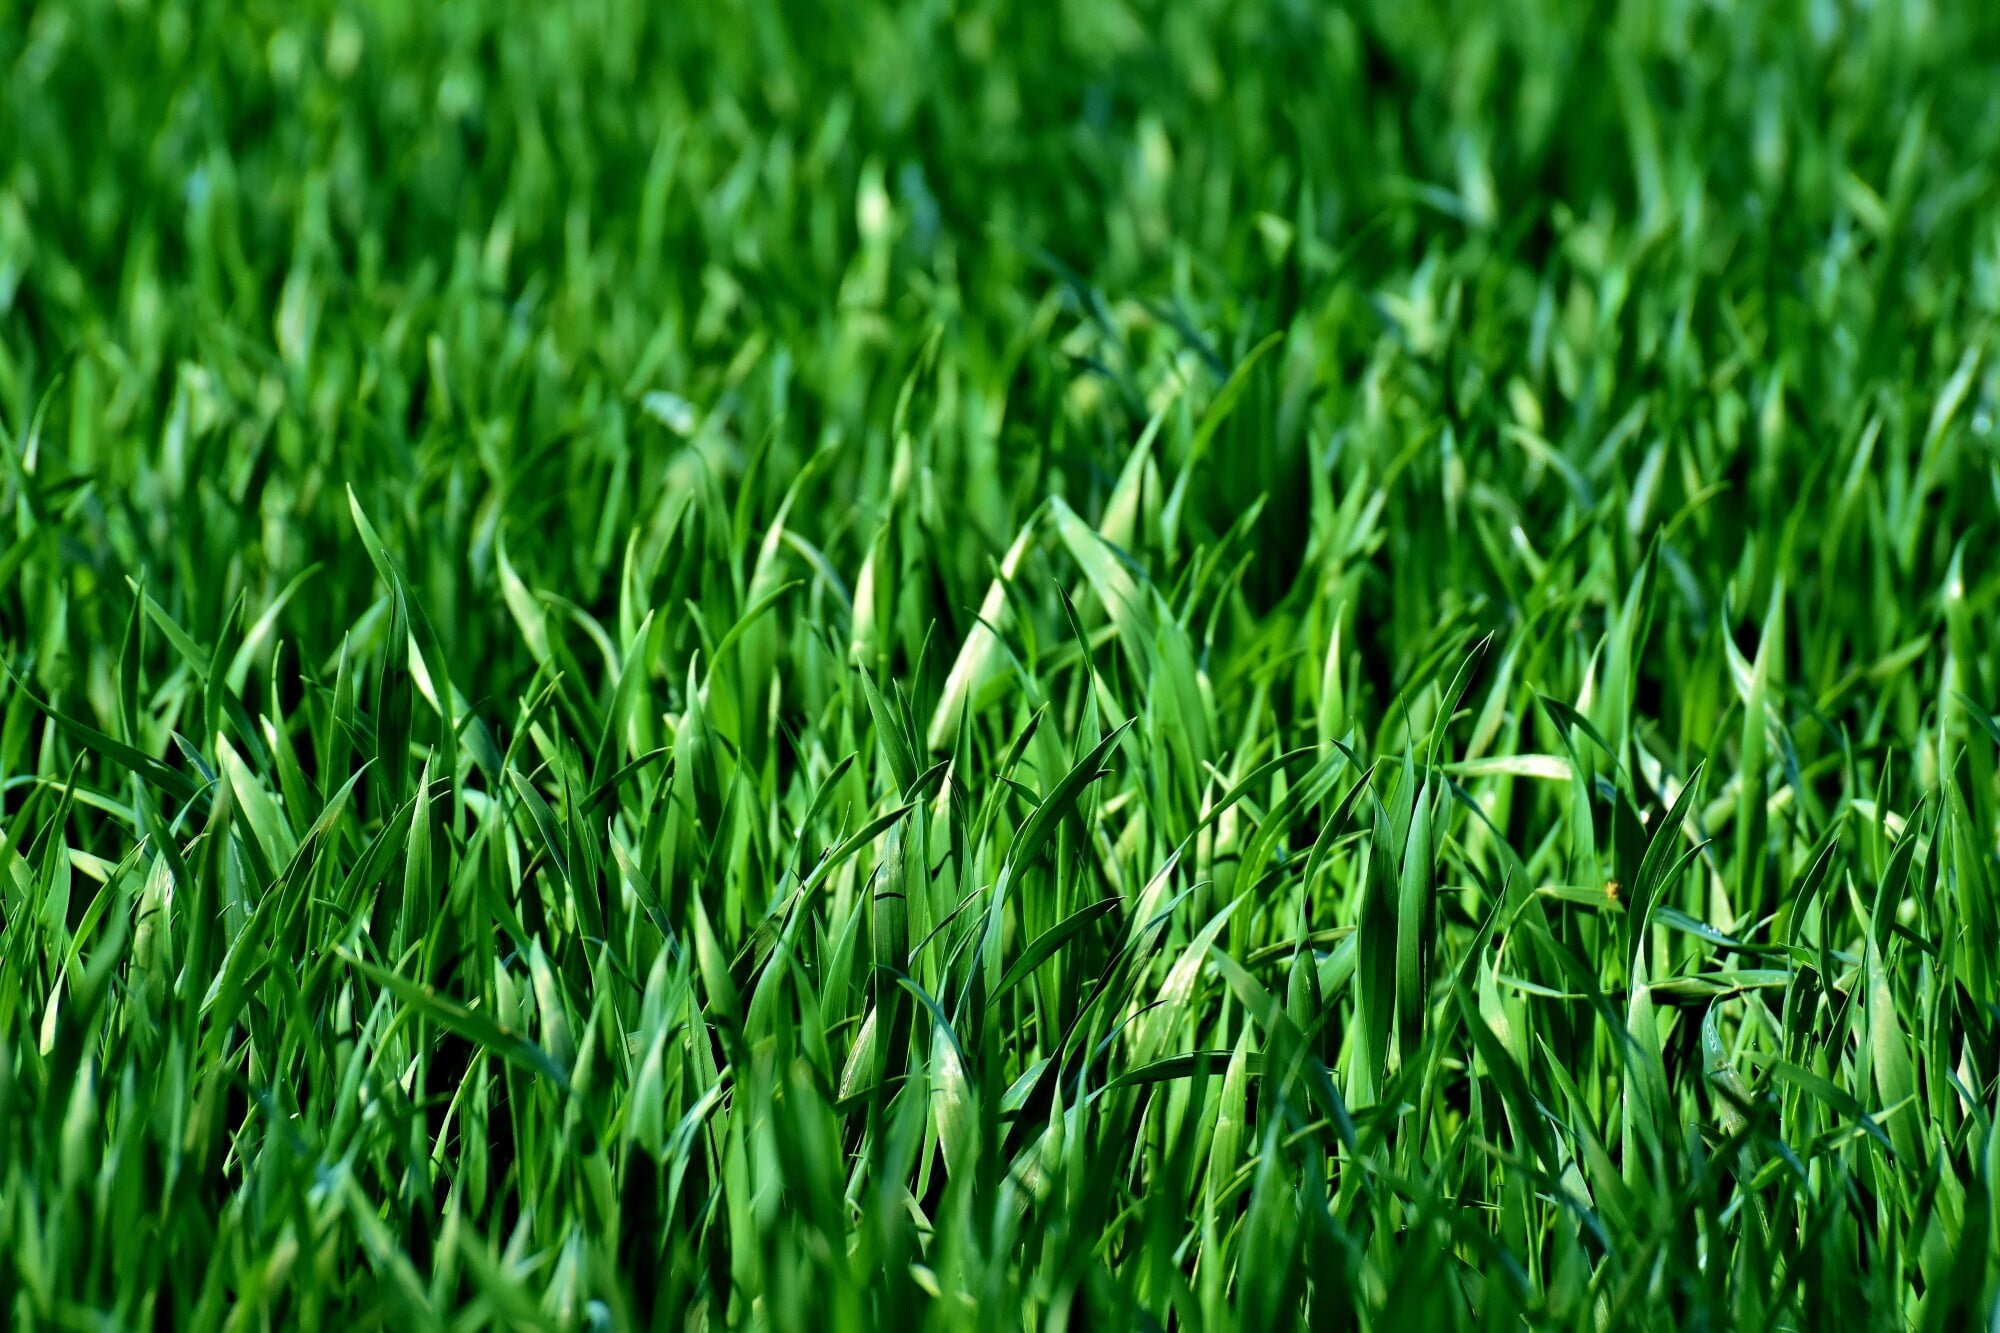 Many people look forward to spring, but are you ready to maintain your lawn the right way? Take a look at these top tips on how to maintain a lawn!